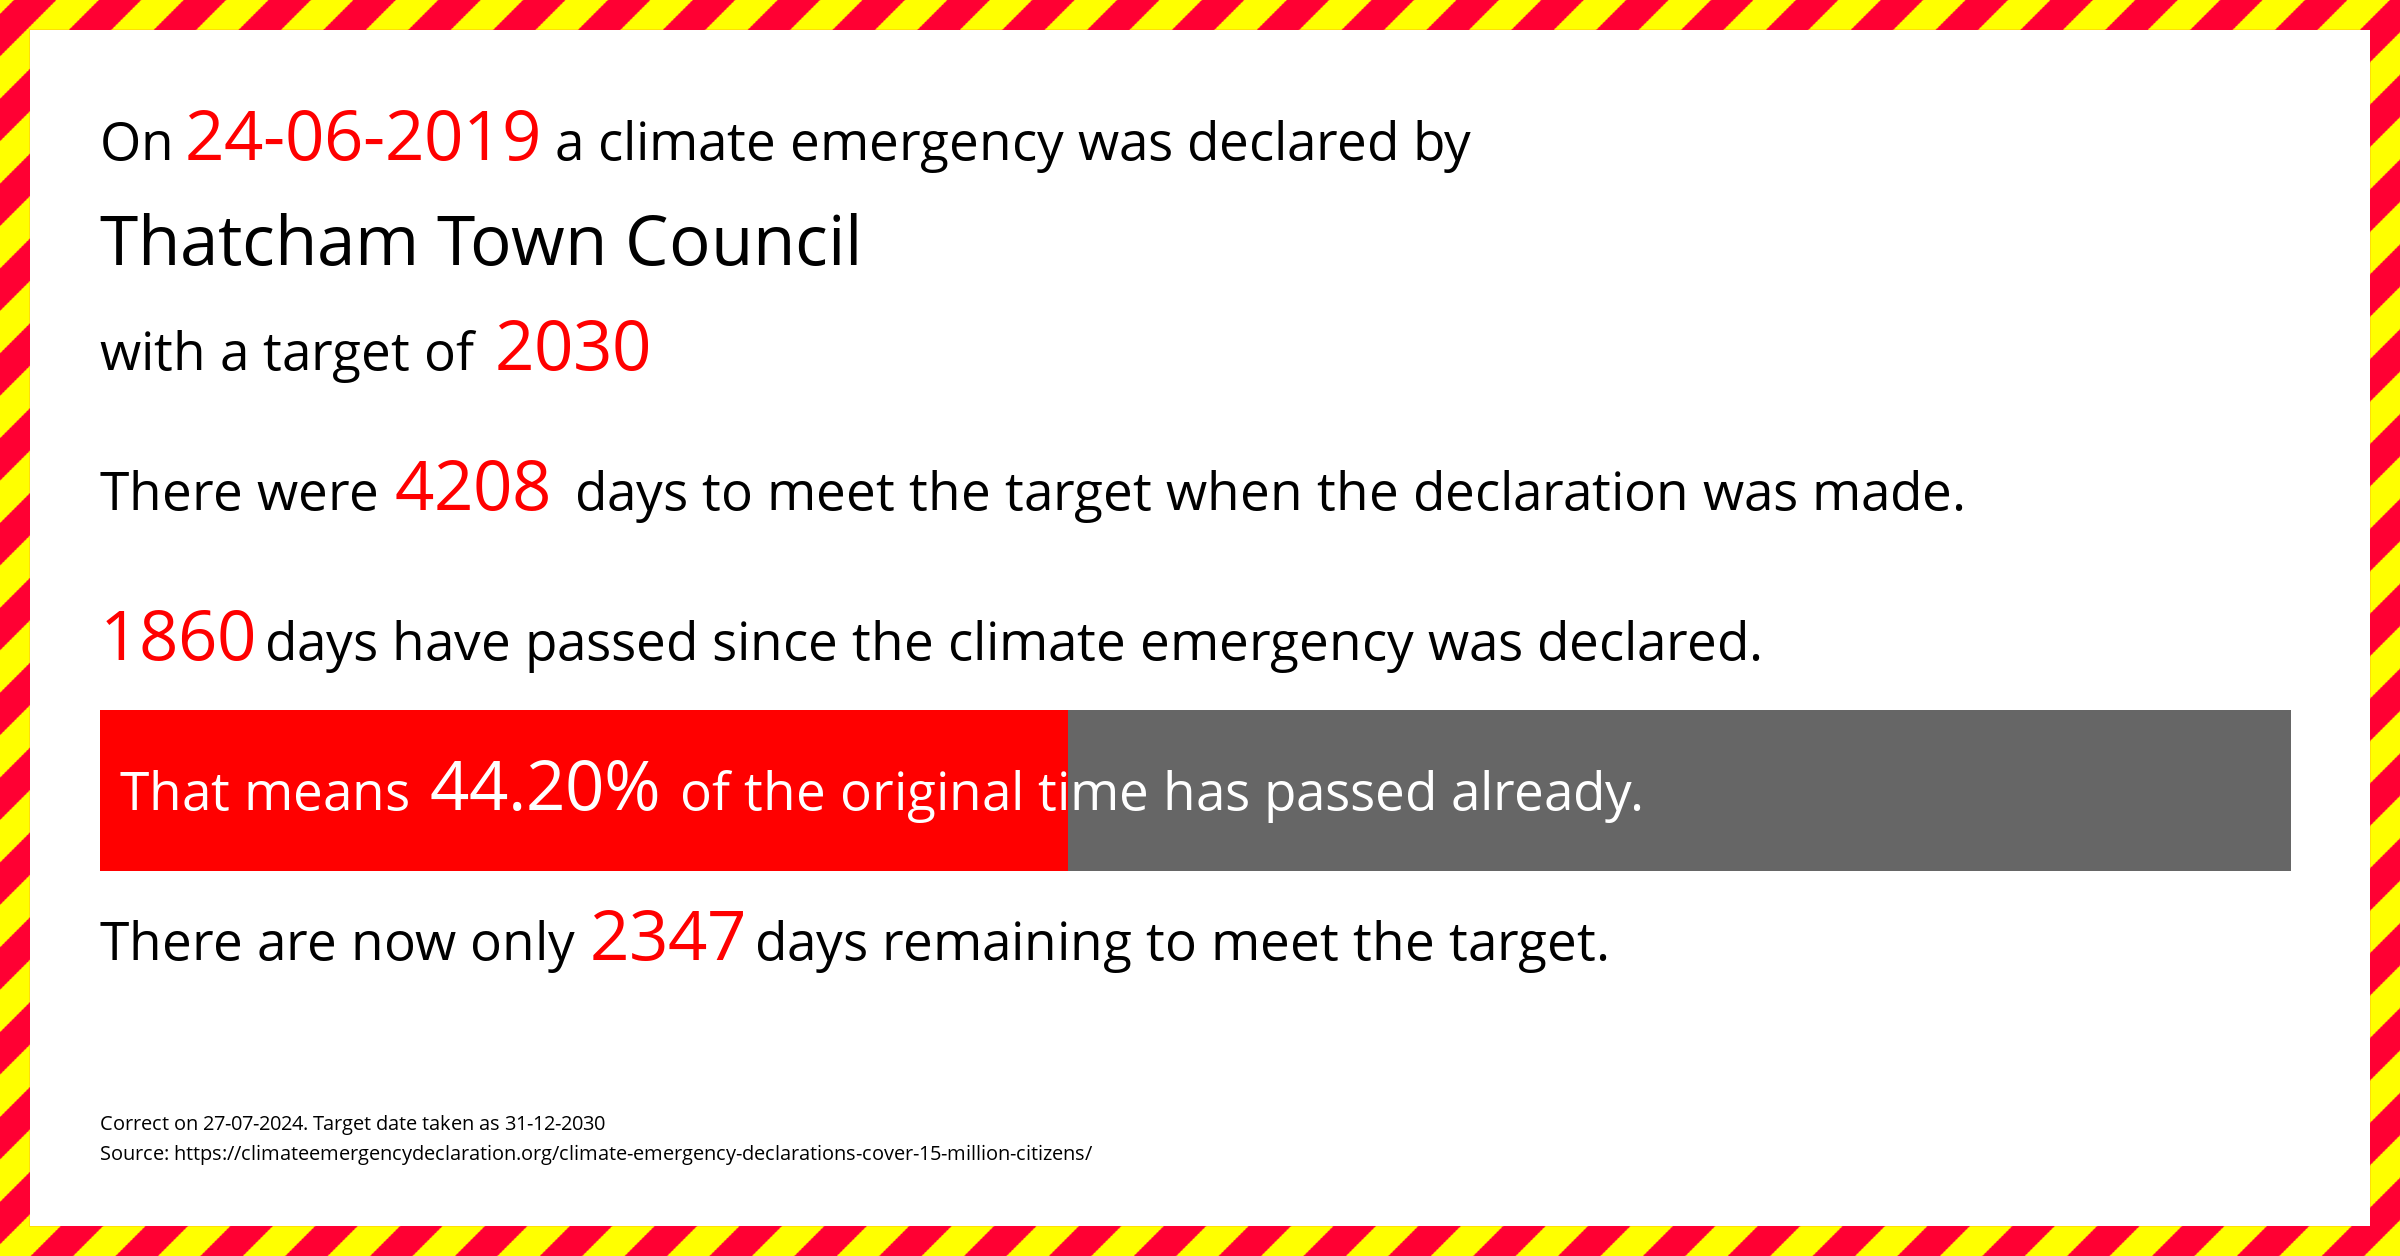 Thatcham Town Council declared a Climate emergency on Monday 24th June 2019, with a target of 2030.